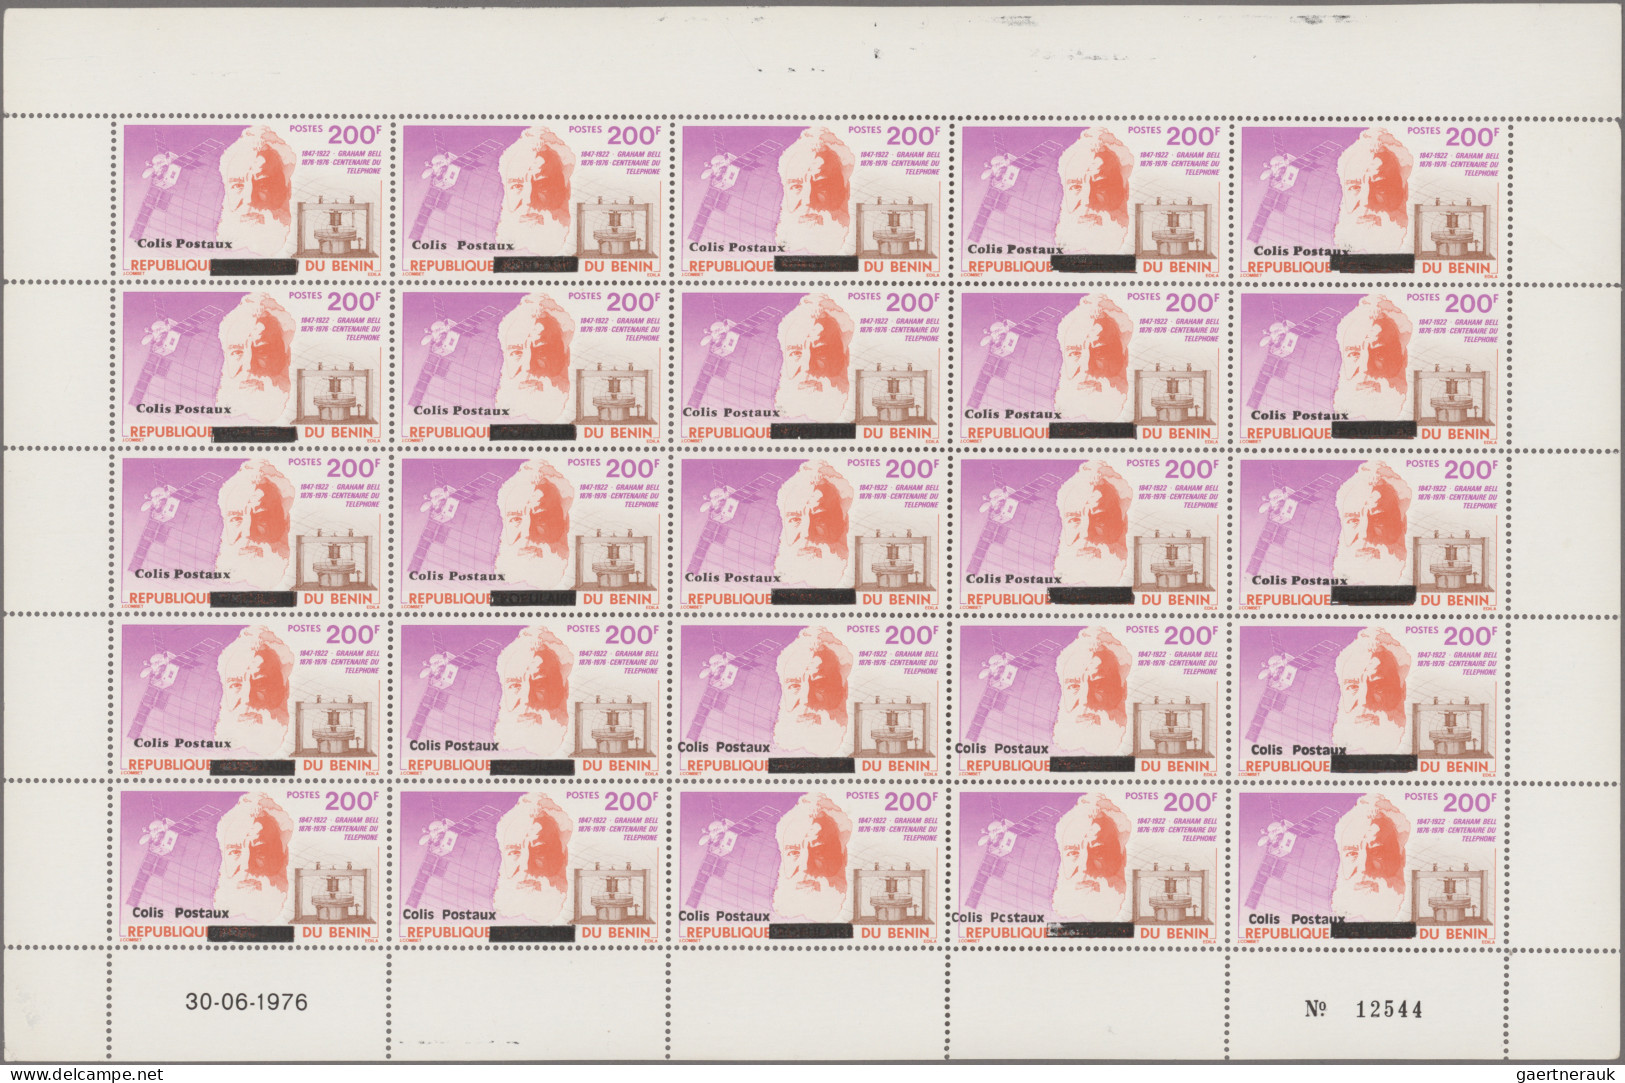 Benin: 2002. Parcel Stamp 200F In A Complete Sheet Of 25 Stamps. 2 Different Fon - Benin – Dahomey (1960-...)